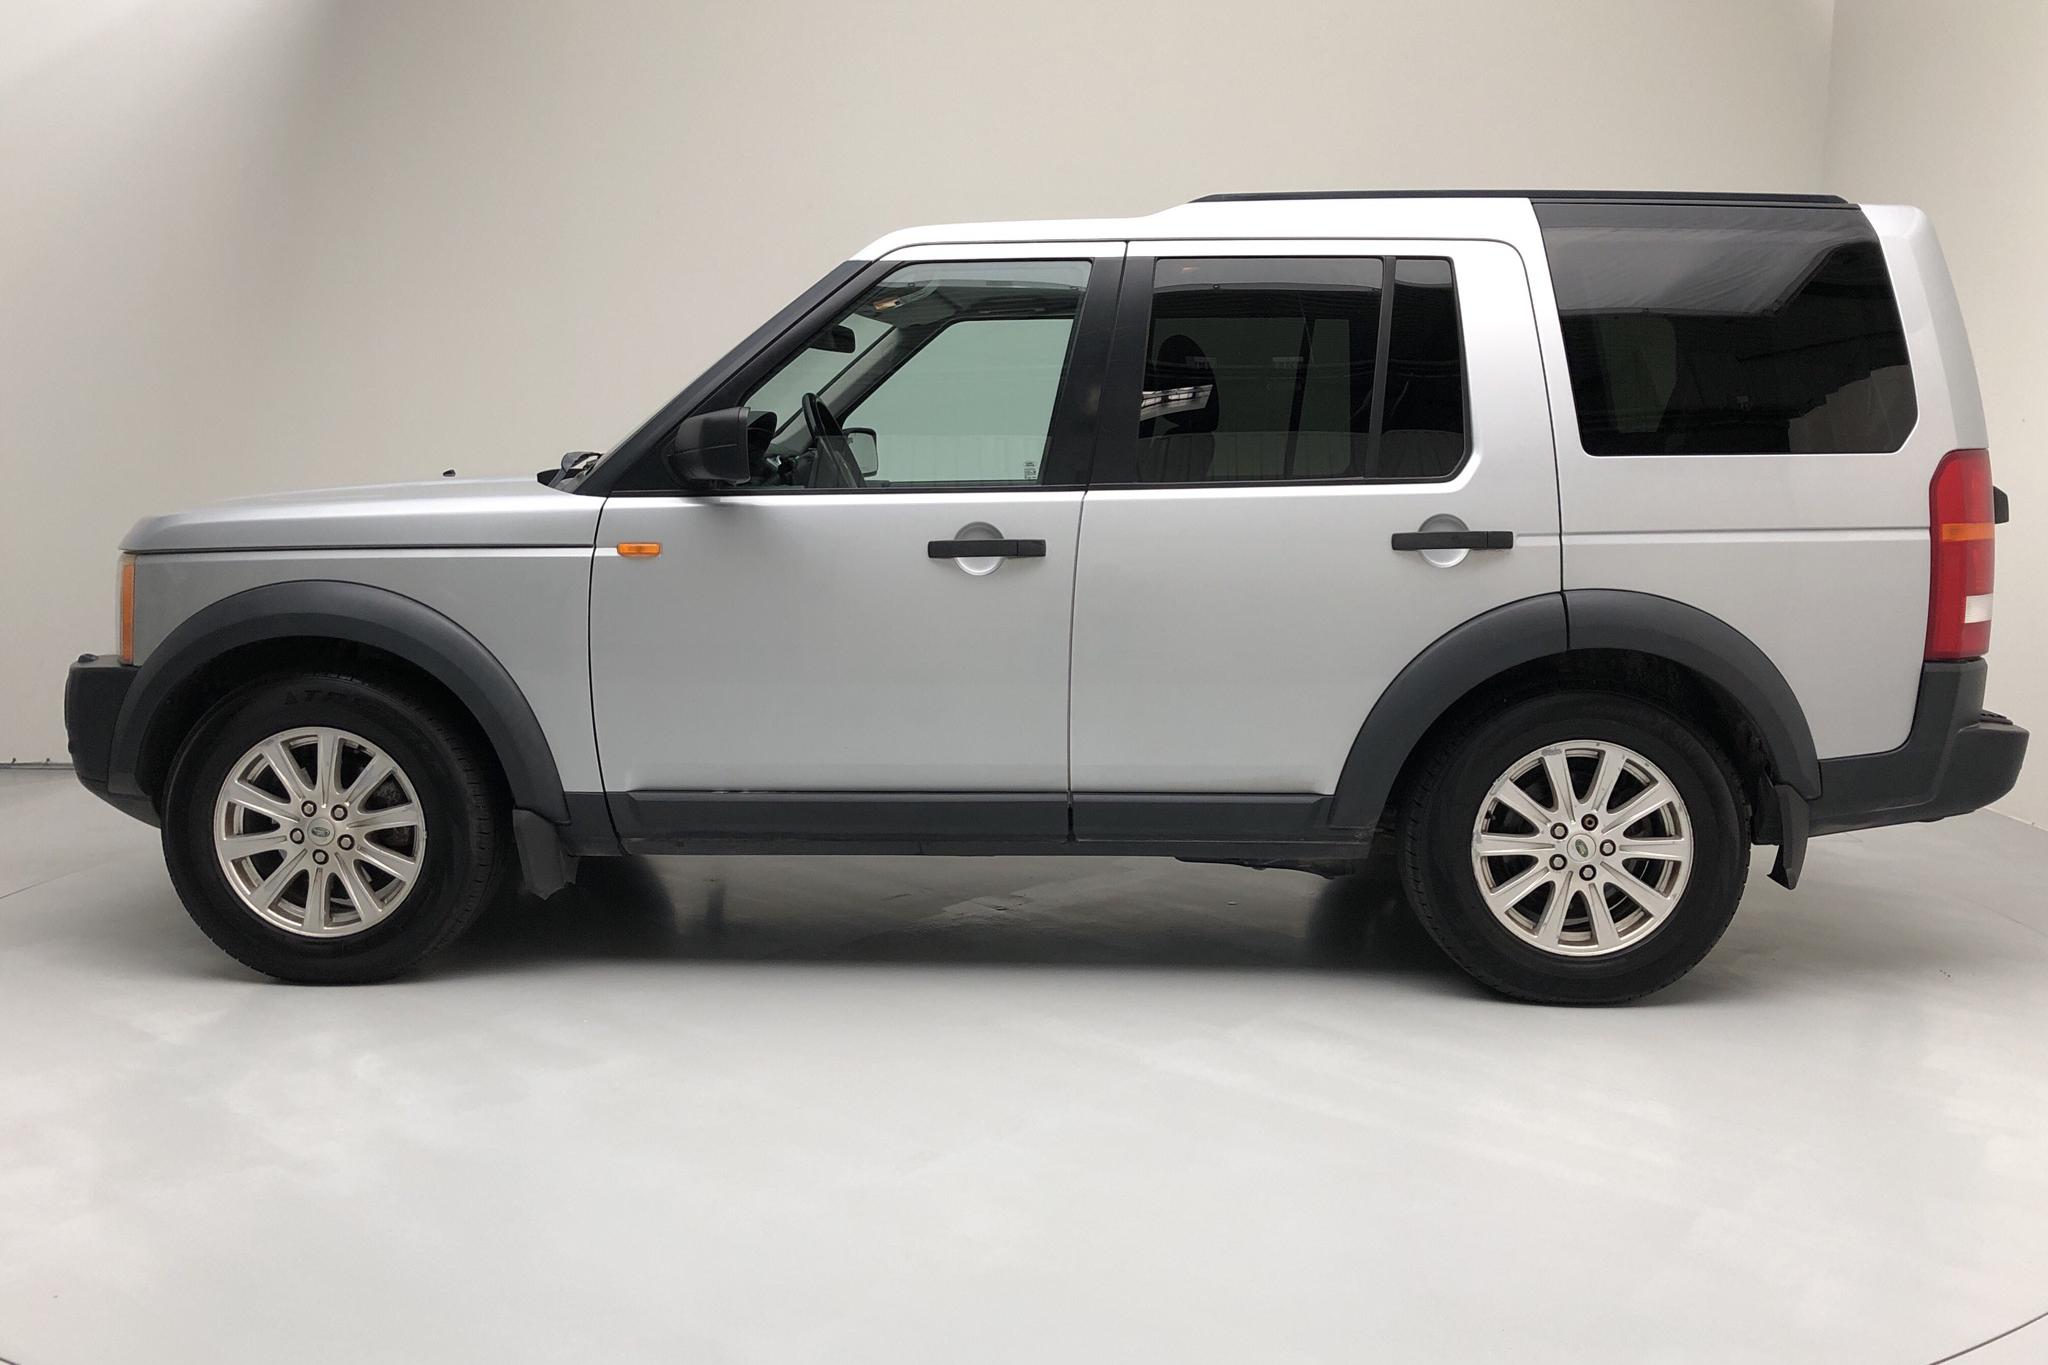 Land Rover Discovery 3 2.7 TDV6 (190hk) - 268 670 km - Automatic - gray - 2008